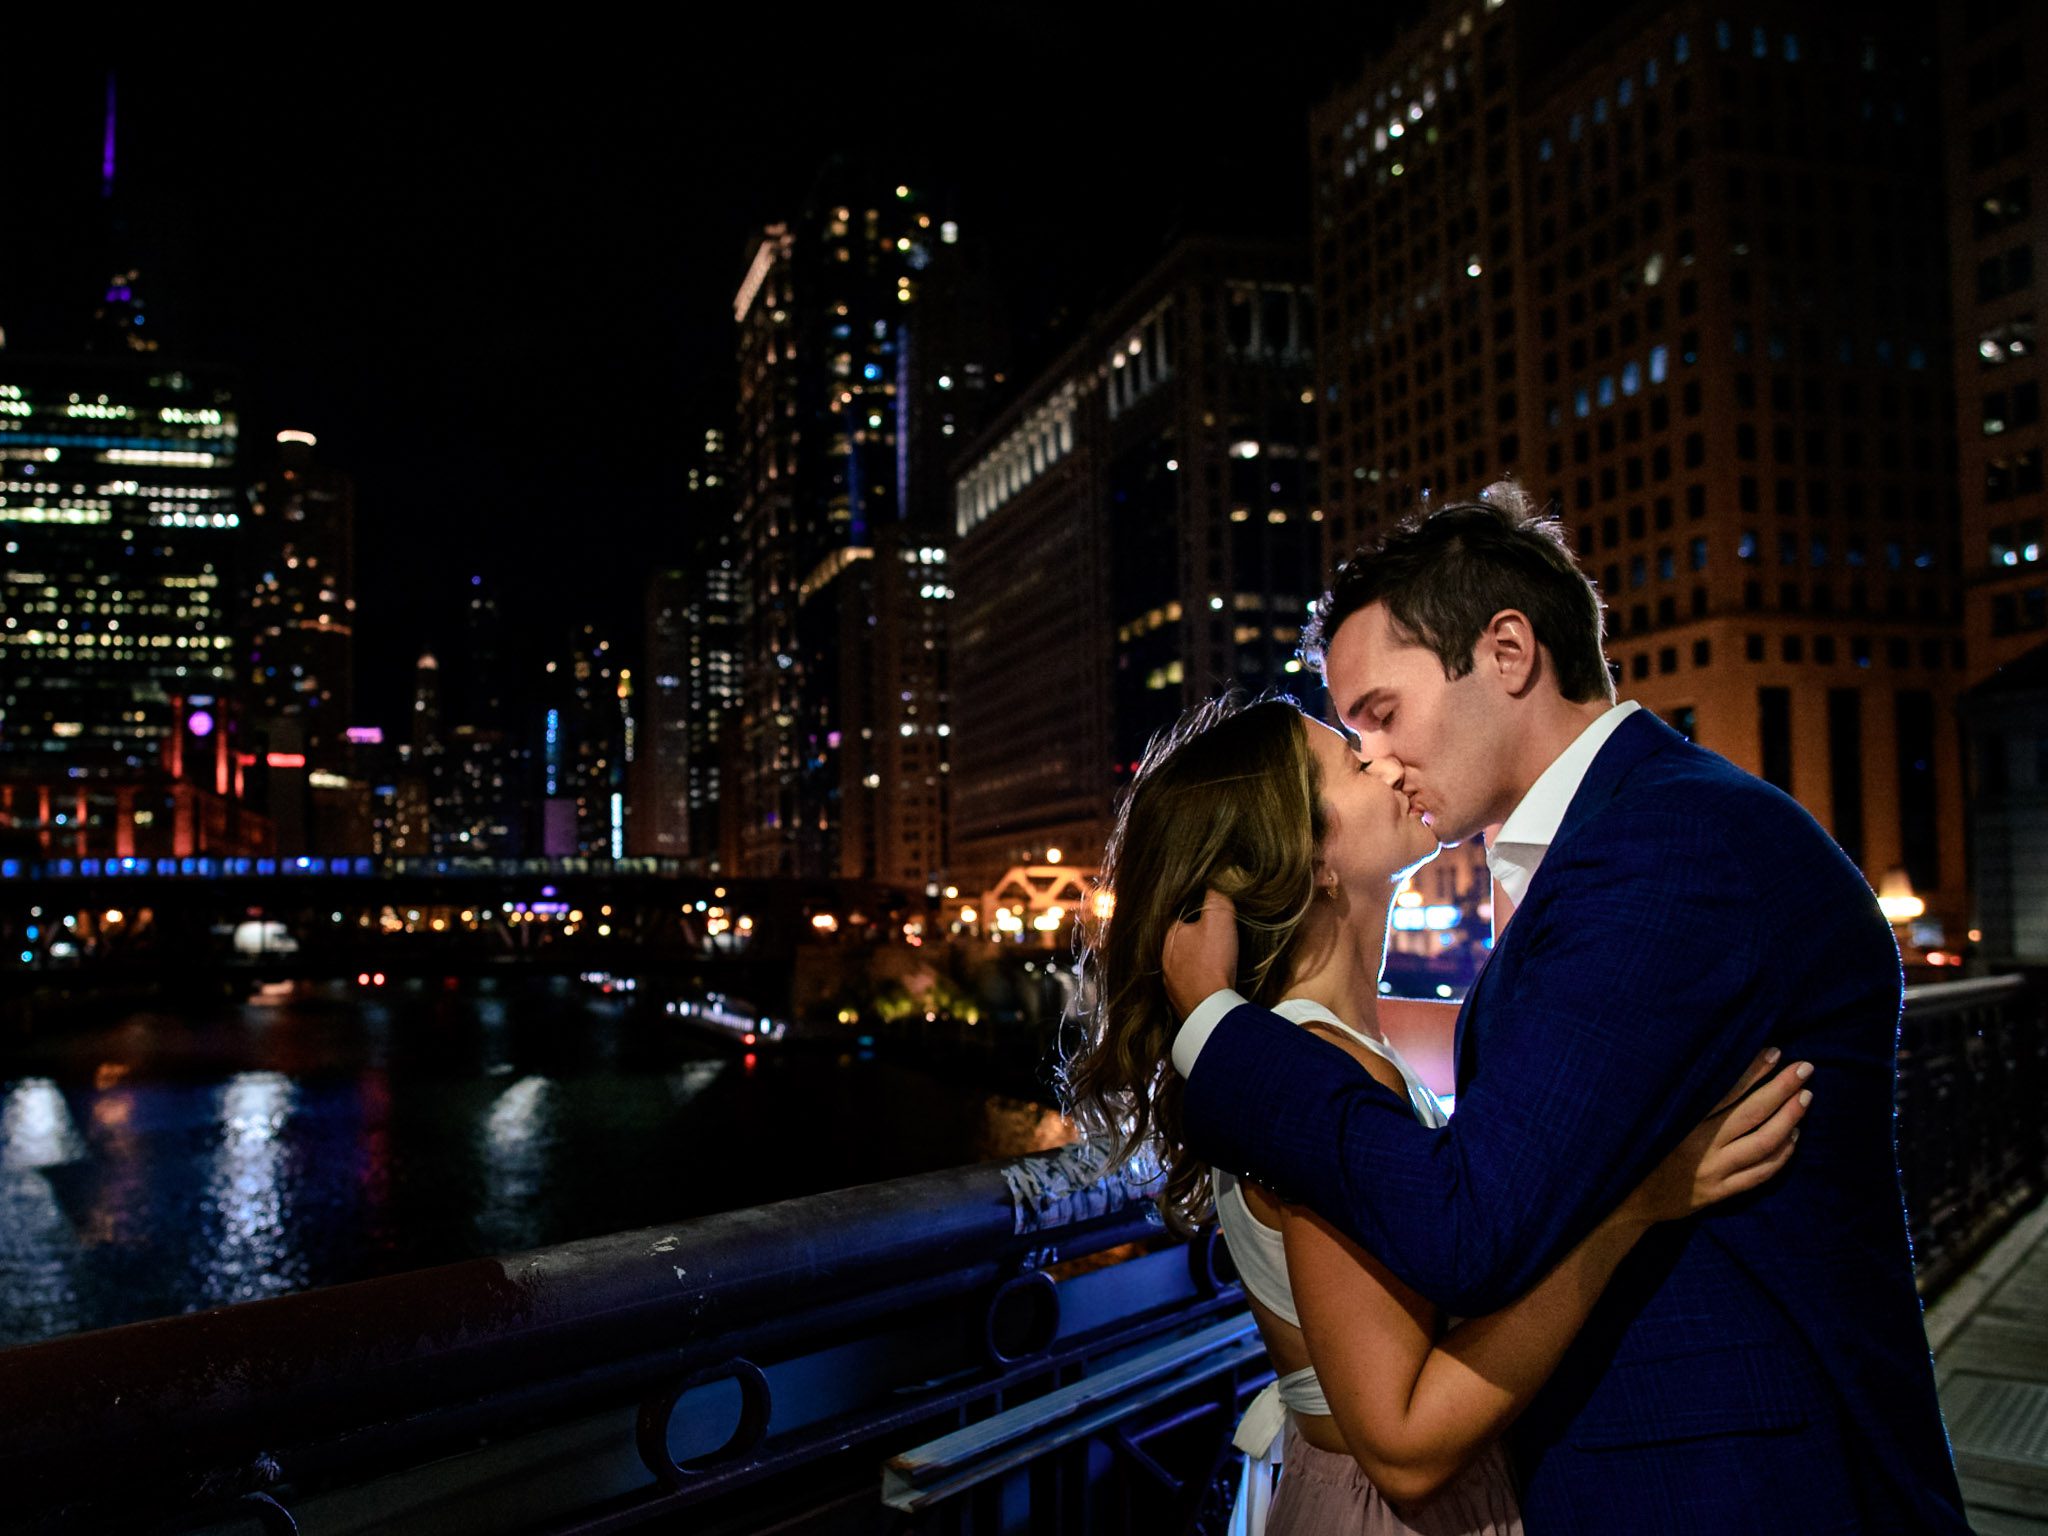 engaged couple dressed up and kissing at night on the lasalle st bridge in downtown chicago for an engagement session